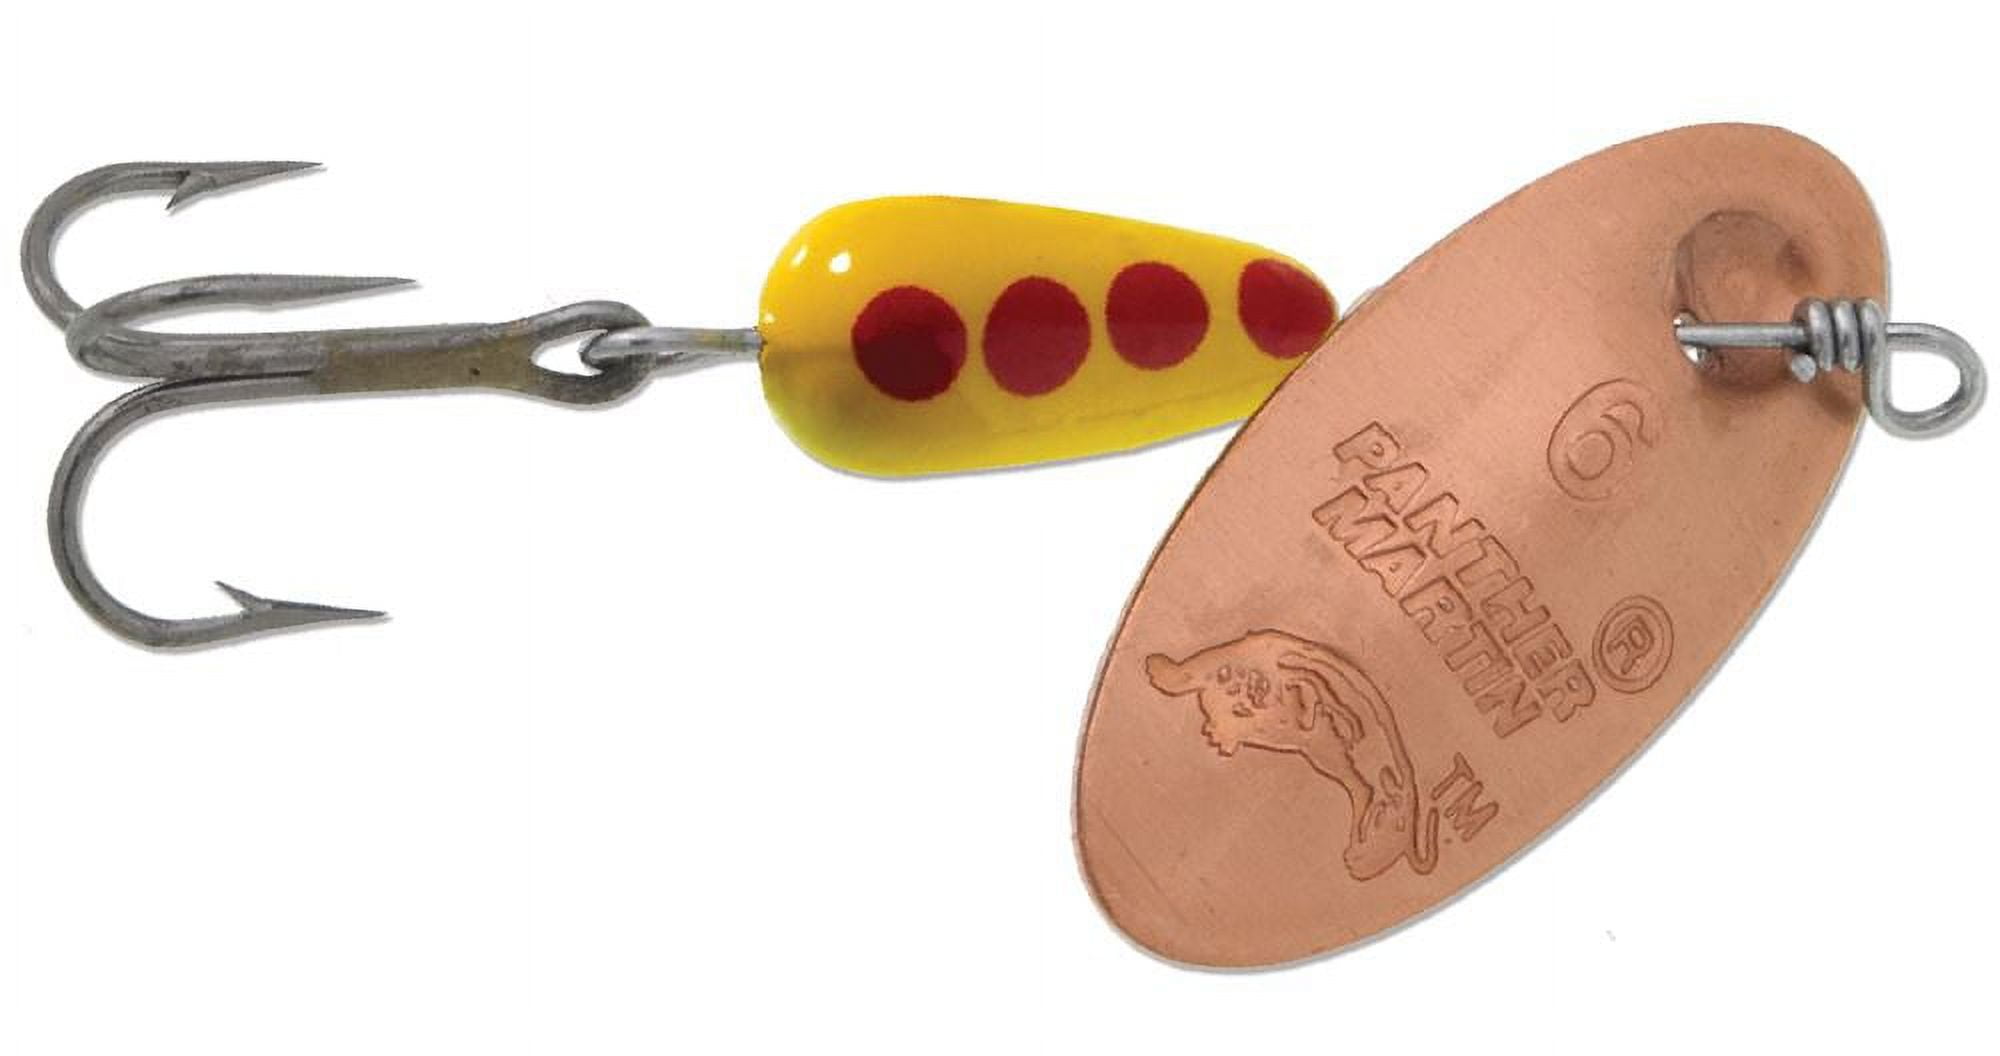 Panther Martin PMCB_2_CY Classic Regular Teardrop Spinners Fishing Lure - 2  (1/16 oz) - Copper/Yellow